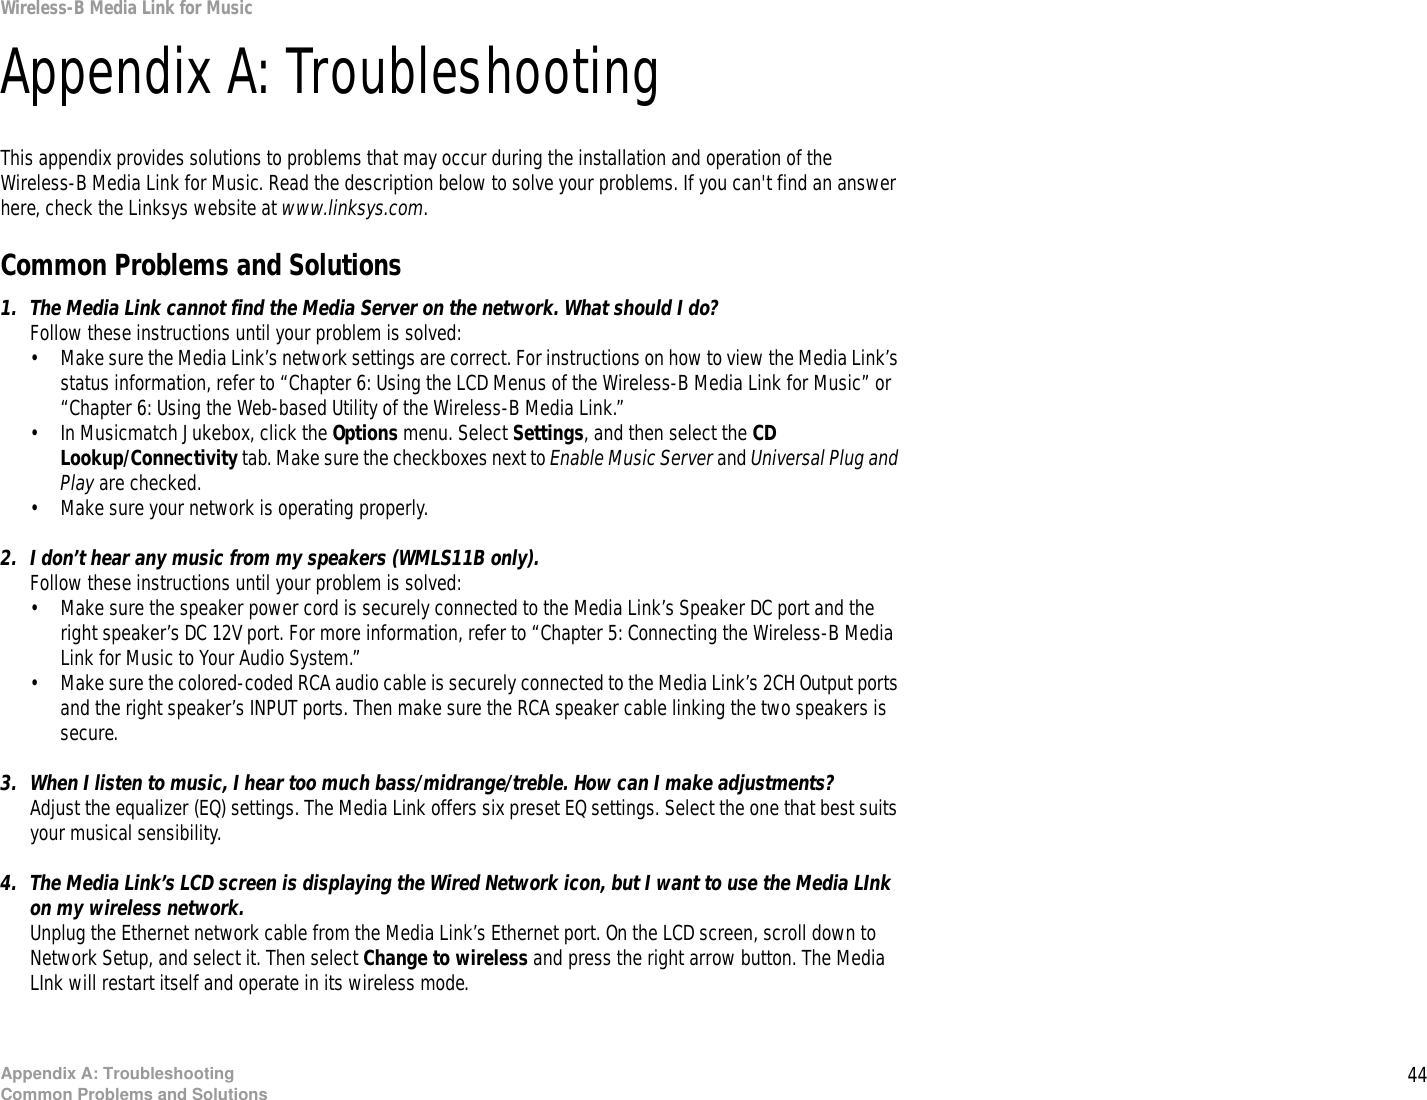 44Appendix A: TroubleshootingCommon Problems and SolutionsWireless-B Media Link for MusicAppendix A: TroubleshootingThis appendix provides solutions to problems that may occur during the installation and operation of the Wireless-B Media Link for Music. Read the description below to solve your problems. If you can&apos;t find an answer here, check the Linksys website at www.linksys.com.Common Problems and Solutions1. The Media Link cannot find the Media Server on the network. What should I do?Follow these instructions until your problem is solved:• Make sure the Media Link’s network settings are correct. For instructions on how to view the Media Link’s status information, refer to “Chapter 6: Using the LCD Menus of the Wireless-B Media Link for Music” or “Chapter 6: Using the Web-based Utility of the Wireless-B Media Link.”• In Musicmatch Jukebox, click the Options menu. Select Settings, and then select the CD Lookup/Connectivity tab. Make sure the checkboxes next to Enable Music Server and Universal Plug and Play are checked.• Make sure your network is operating properly.2. I don’t hear any music from my speakers (WMLS11B only).Follow these instructions until your problem is solved:• Make sure the speaker power cord is securely connected to the Media Link’s Speaker DC port and the right speaker’s DC 12V port. For more information, refer to “Chapter 5: Connecting the Wireless-B Media Link for Music to Your Audio System.”• Make sure the colored-coded RCA audio cable is securely connected to the Media Link’s 2CH Output ports and the right speaker’s INPUT ports. Then make sure the RCA speaker cable linking the two speakers is secure.3. When I listen to music, I hear too much bass/midrange/treble. How can I make adjustments?Adjust the equalizer (EQ) settings. The Media Link offers six preset EQ settings. Select the one that best suits your musical sensibility.4. The Media Link’s LCD screen is displaying the Wired Network icon, but I want to use the Media LInk on my wireless network.Unplug the Ethernet network cable from the Media Link’s Ethernet port. On the LCD screen, scroll down to Network Setup, and select it. Then select Change to wireless and press the right arrow button. The Media LInk will restart itself and operate in its wireless mode.